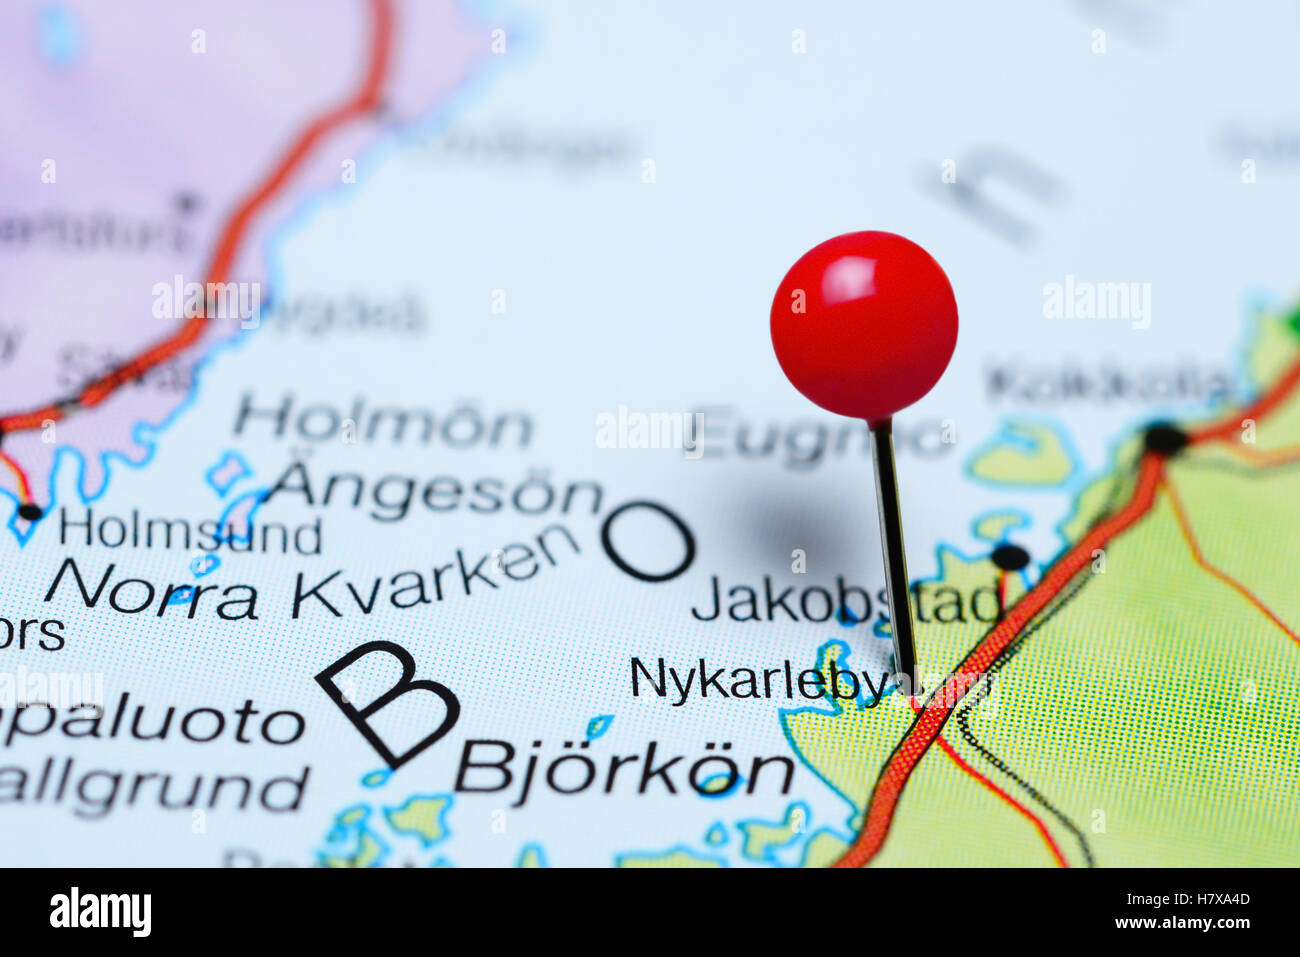 Nykarleby pinned on a map of Finland Stock Photo